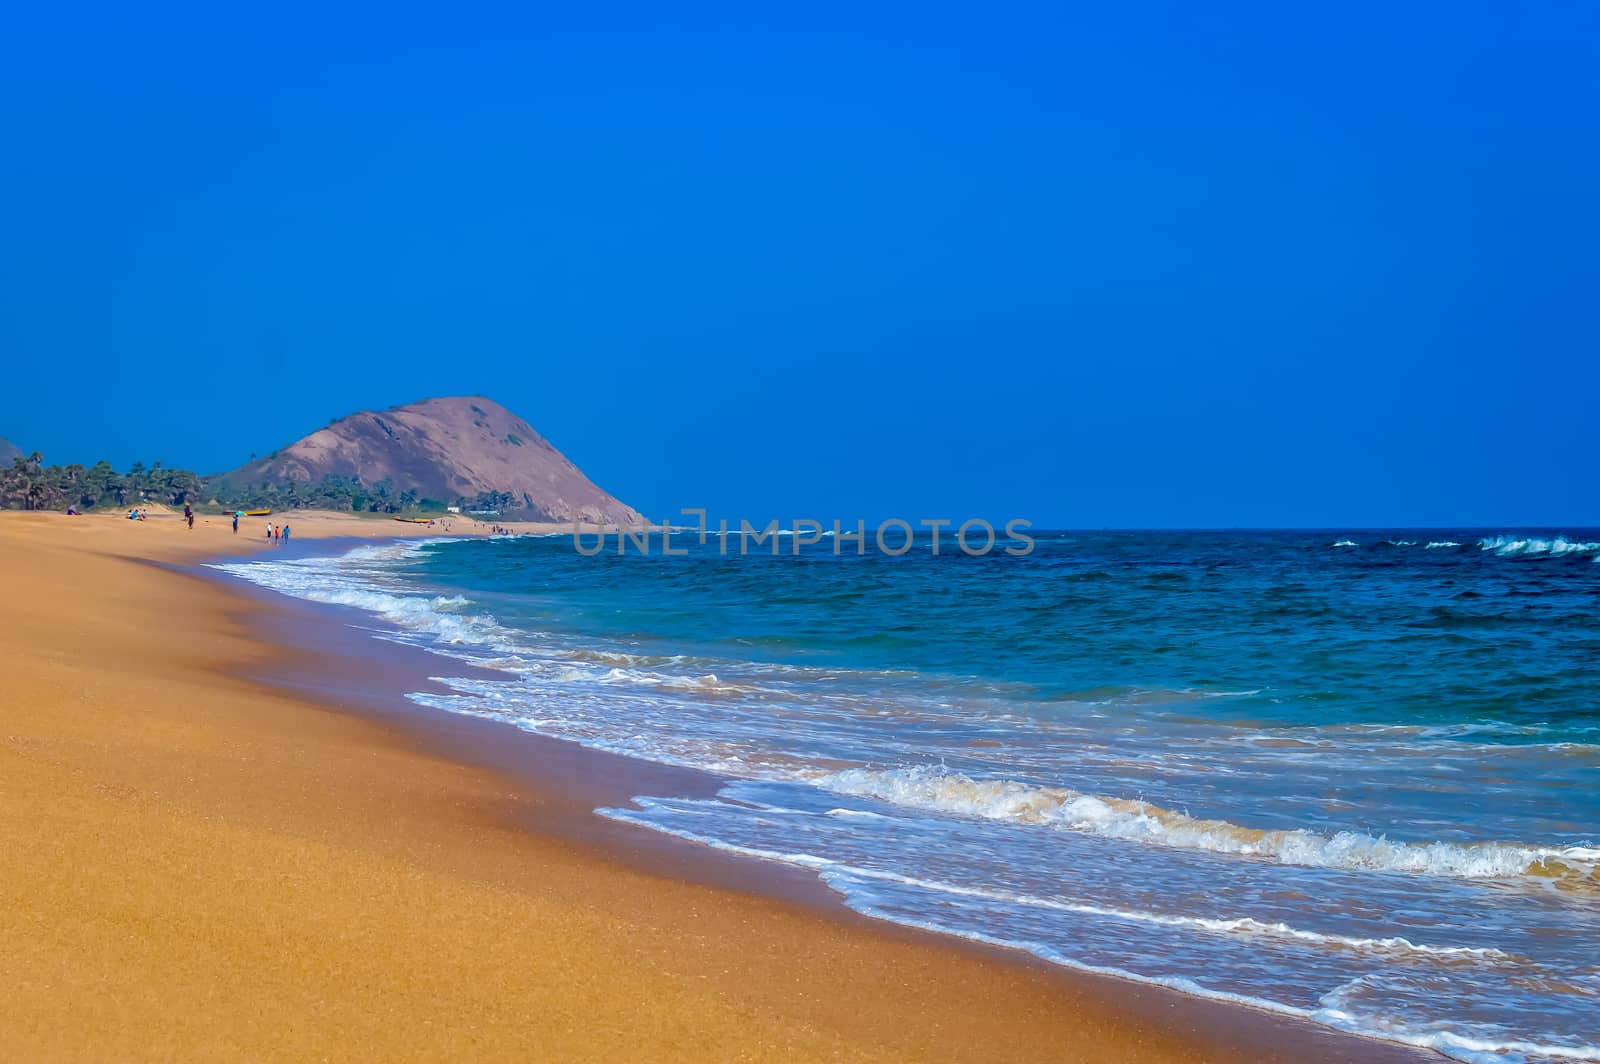 Wild Empty Tropical beach, vibrant yellow sand, bright blue sky, crystal clear waters with water crashing on the shore at daytime on a sunny day in in as landscape style may be used as a background, wallpaper, screen saver Travel vacation concept. The image is exciting, bright, sensational, tranquil, calm, stunning